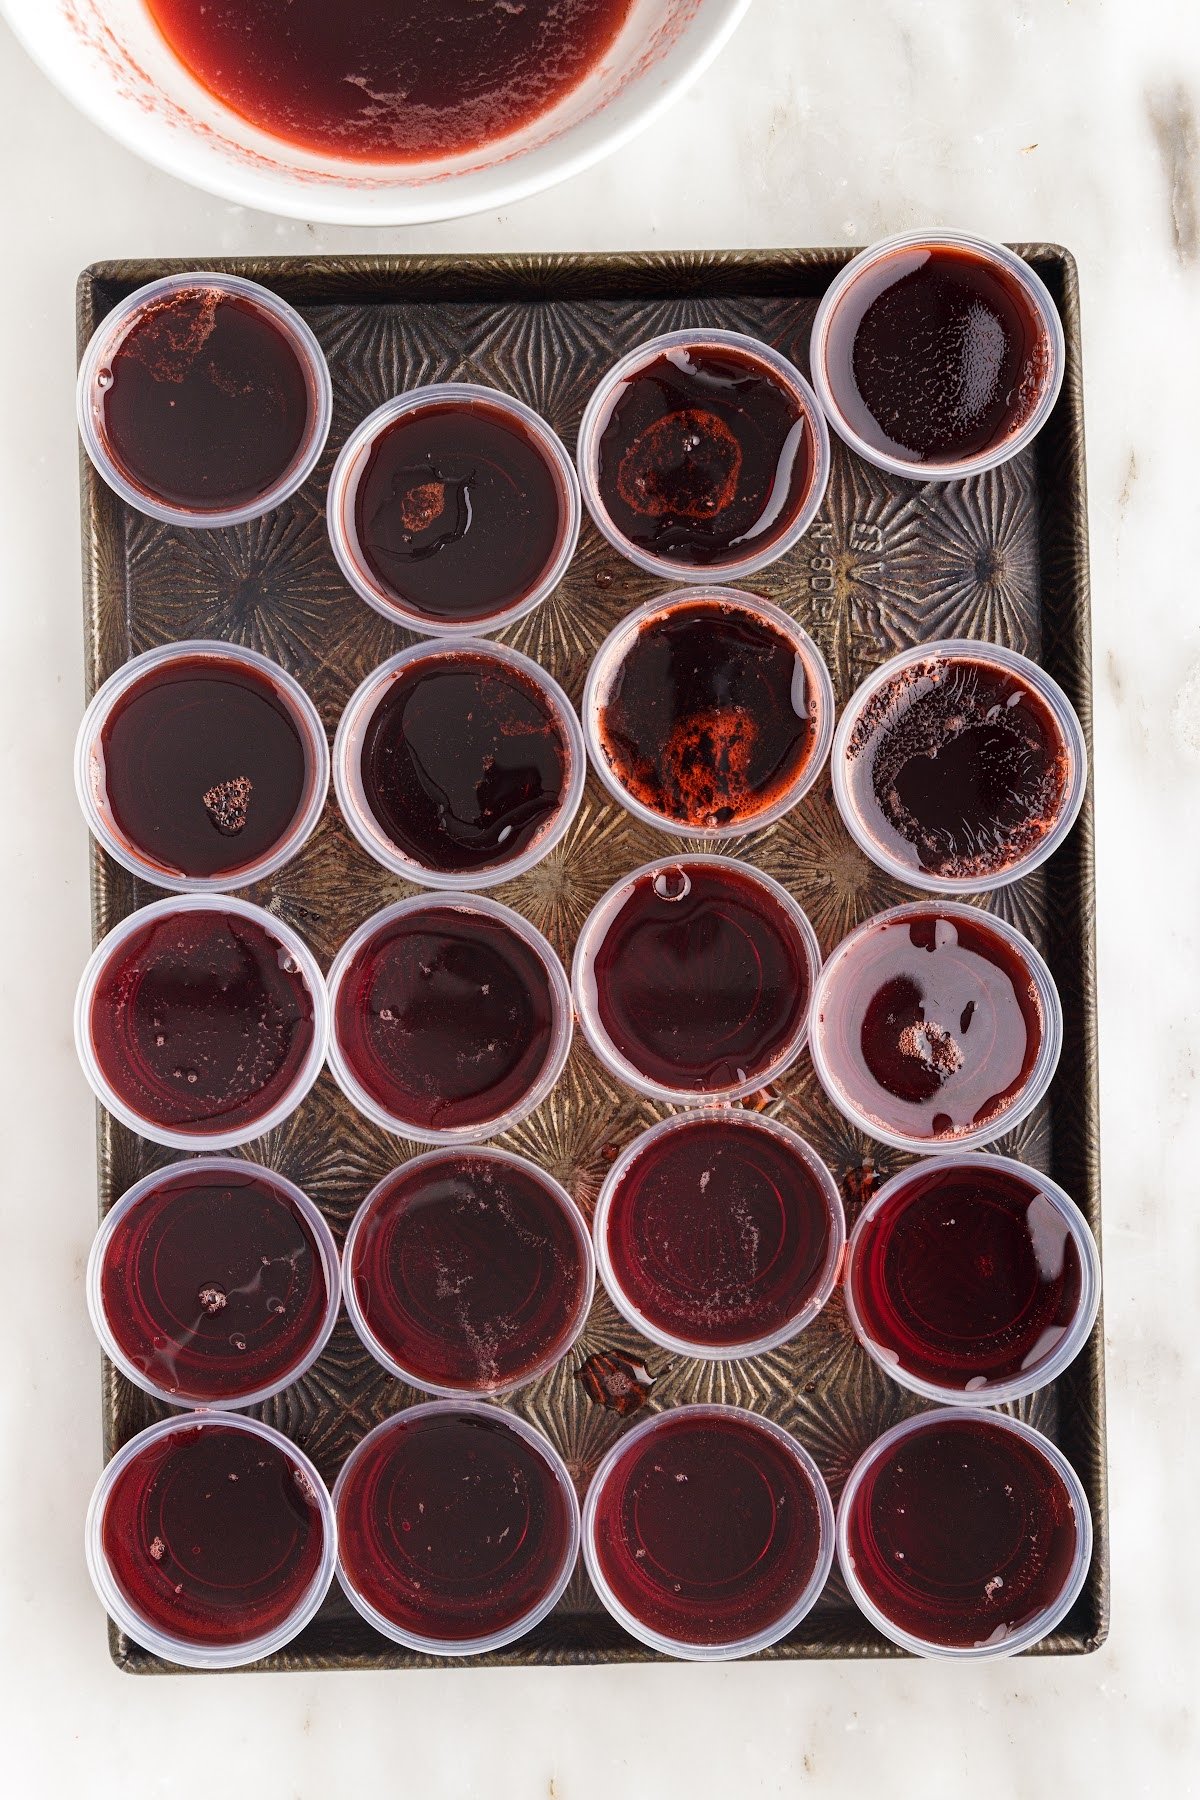 Overhead view of Cherry Coke Jello Shots on a cookie sheet.